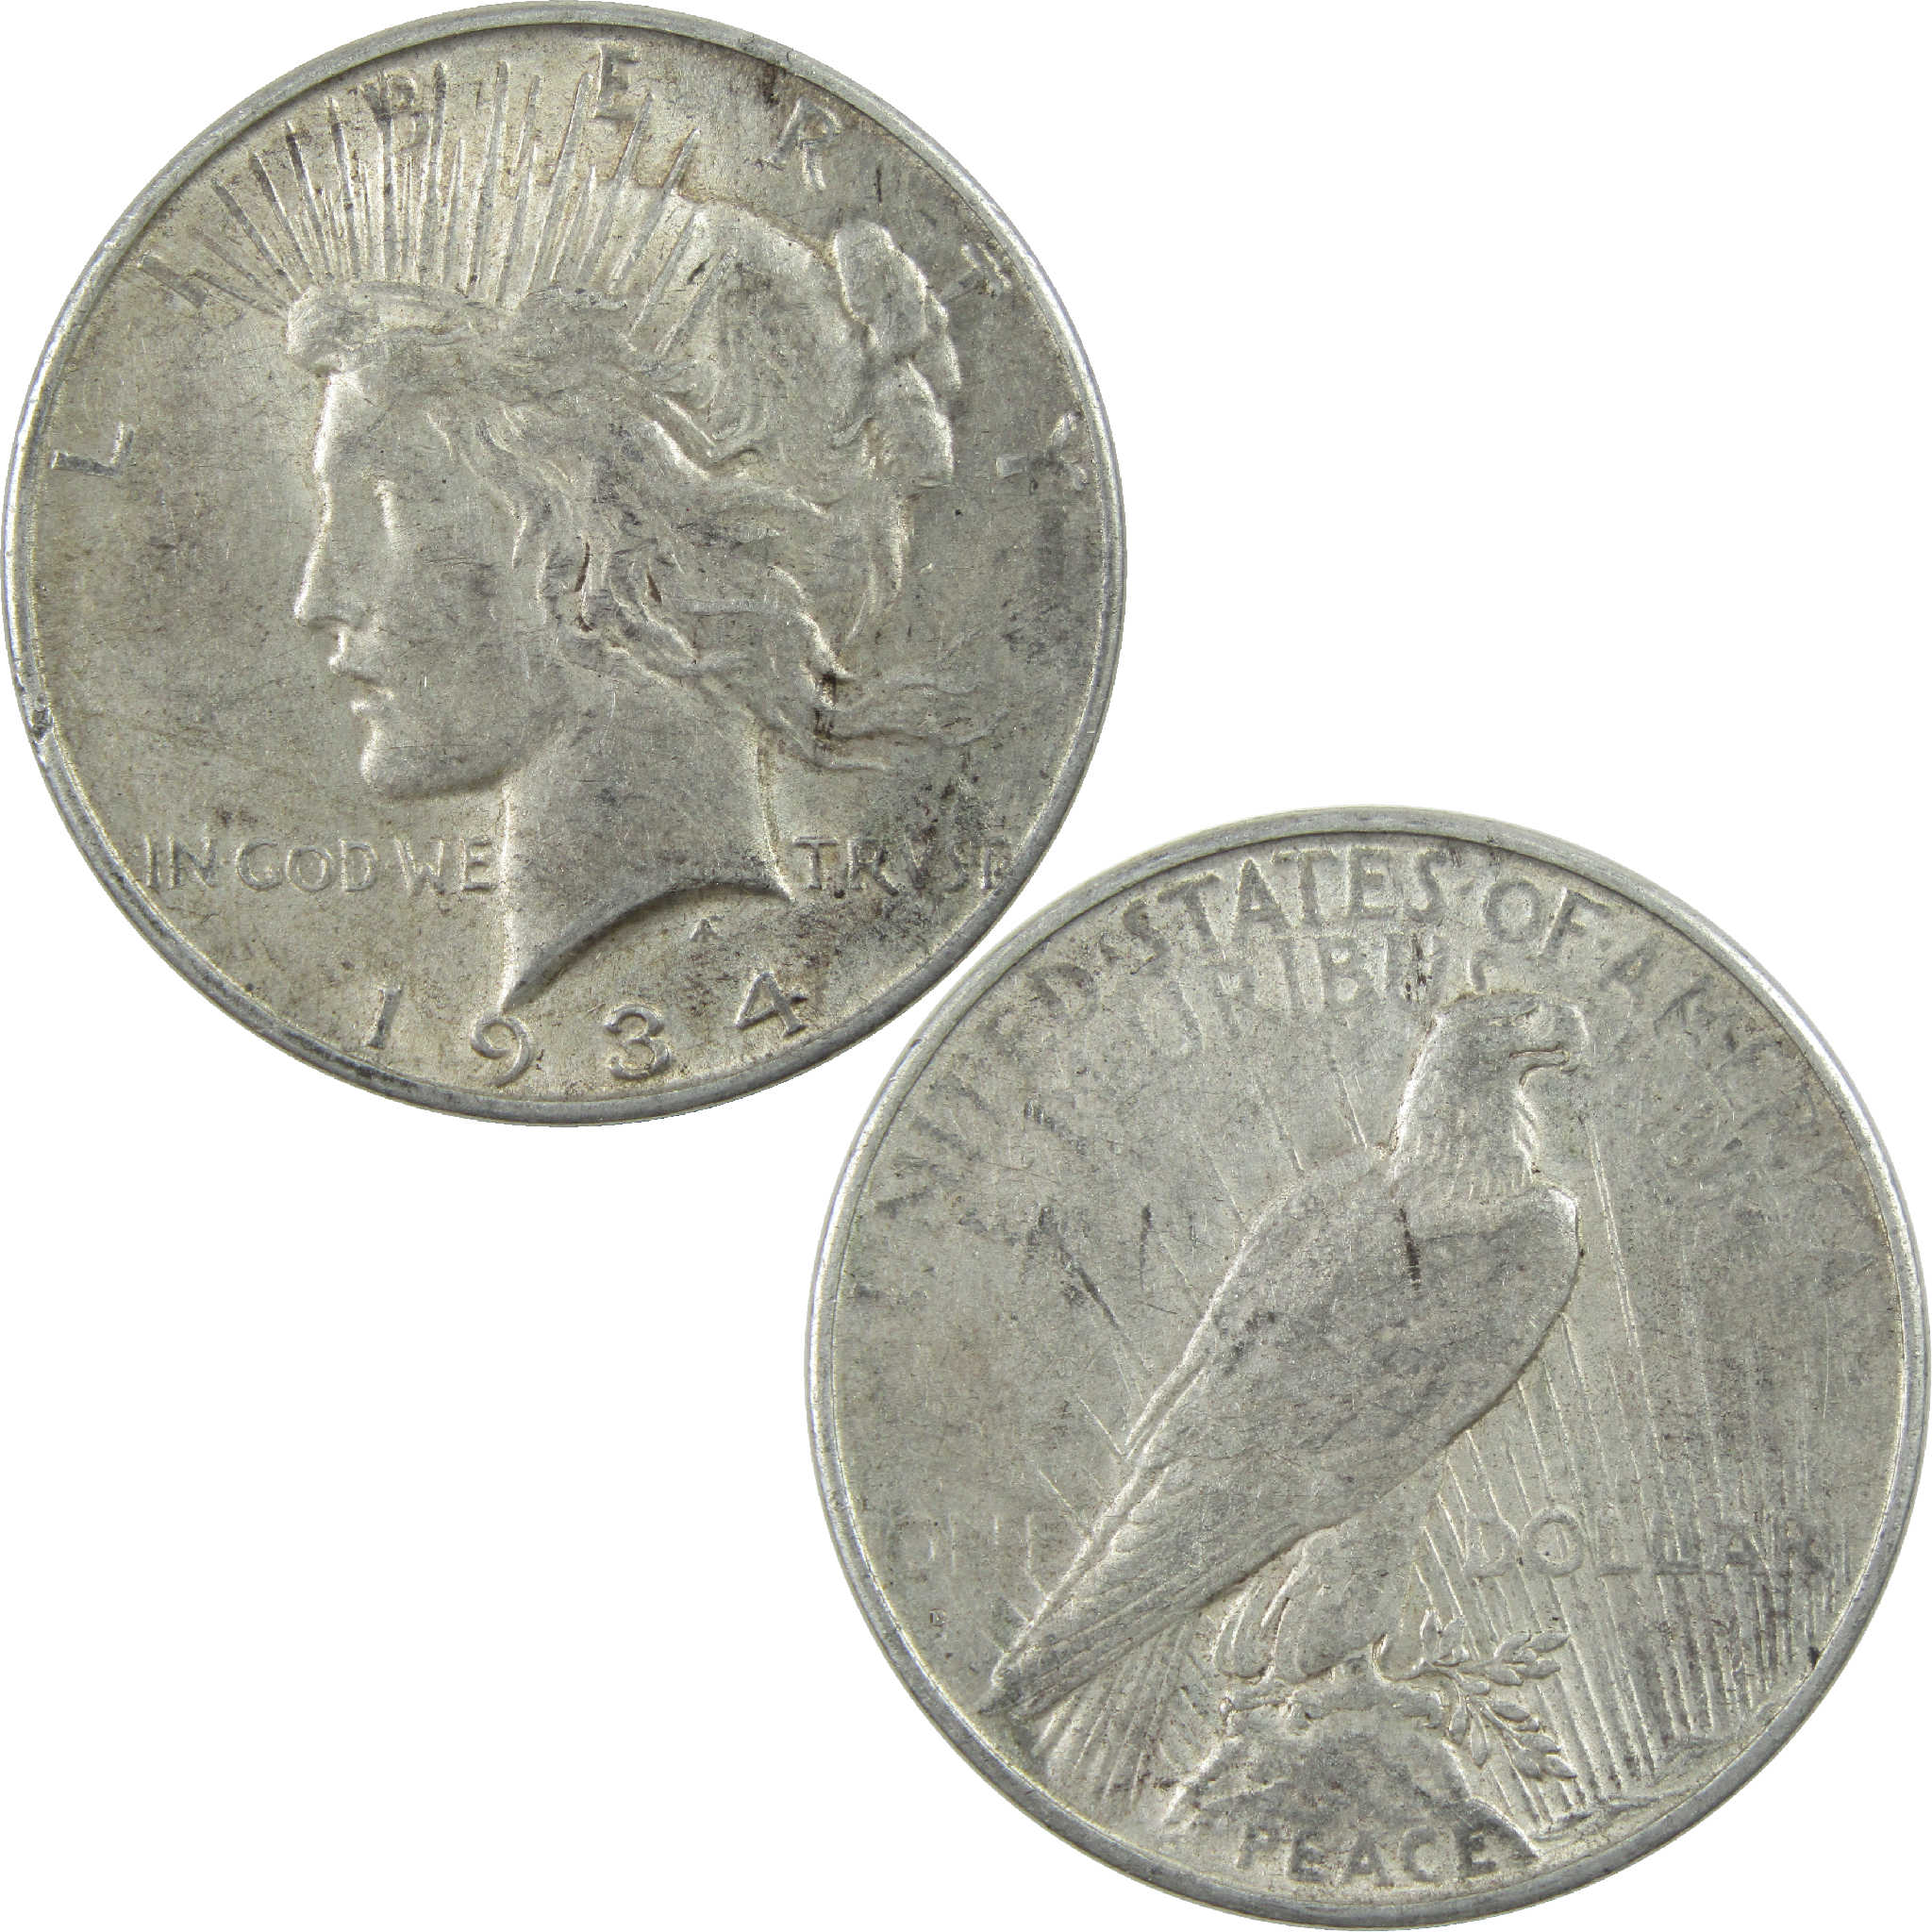 1934 D Peace Dollar XF EF Extremely Fine Silver $1 Coin SKU:I11813